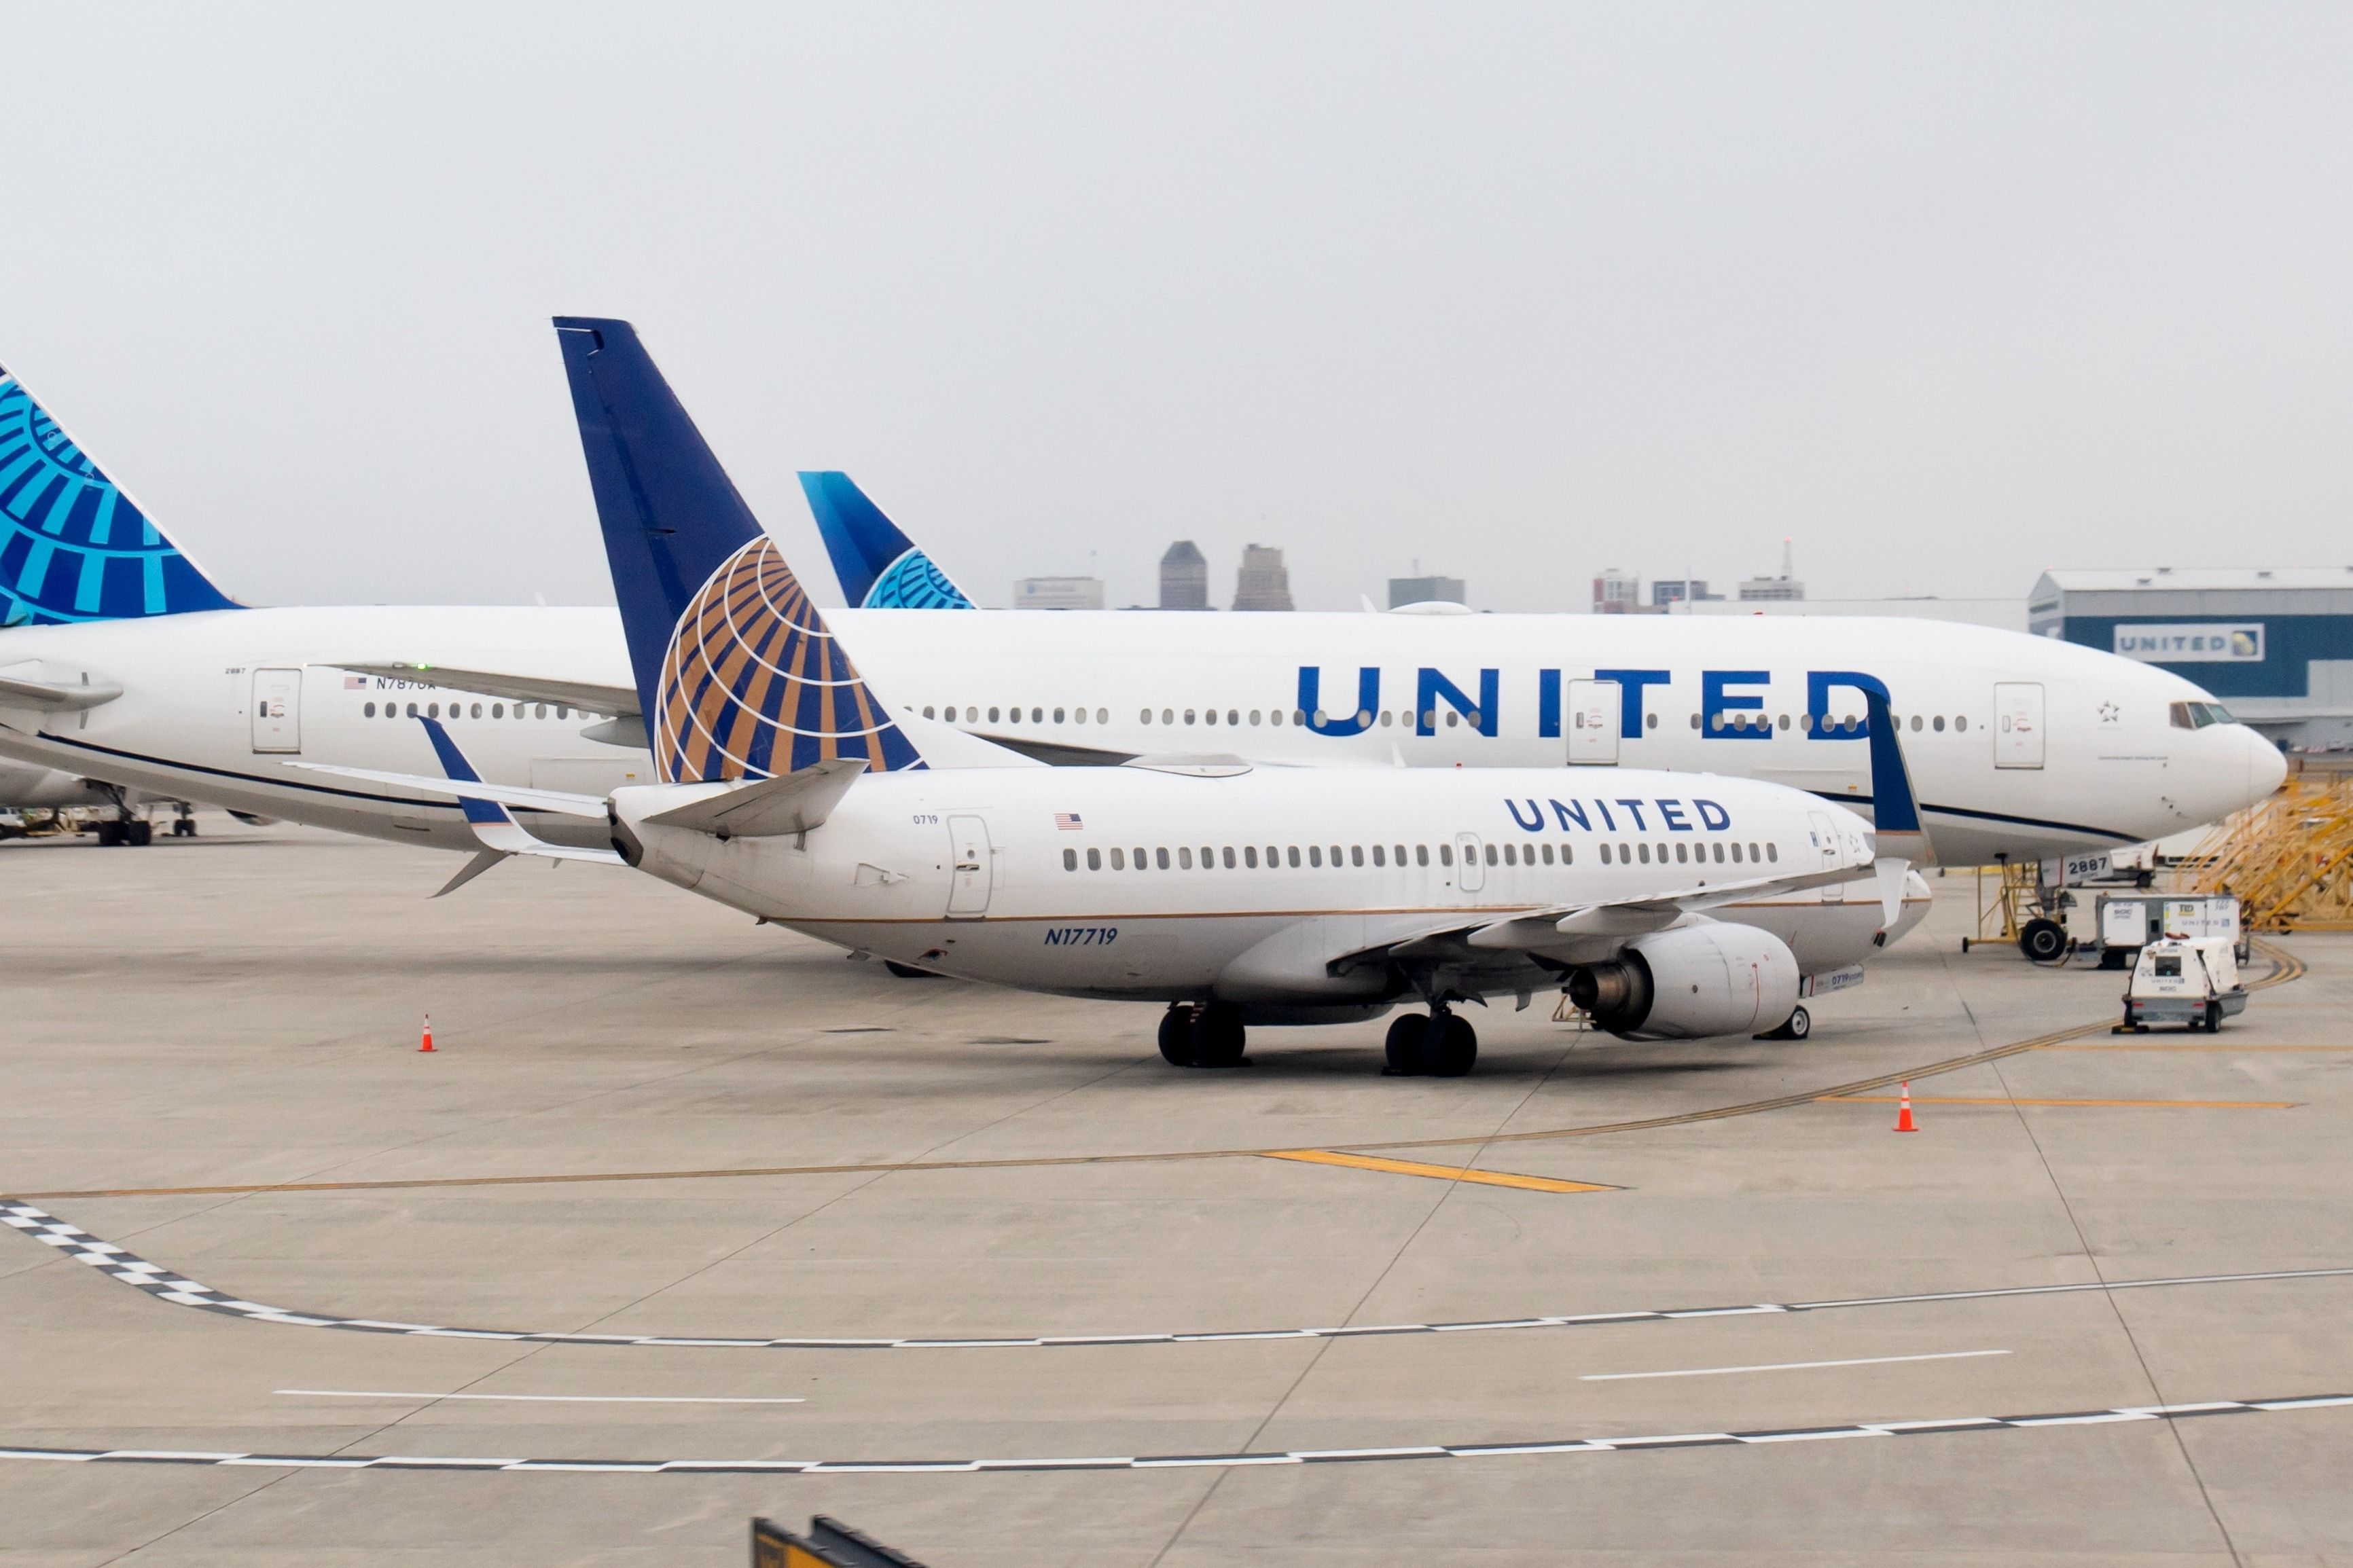 A United Airlines narrowbody parked next to a widebody at Newark Liberty International Airport.